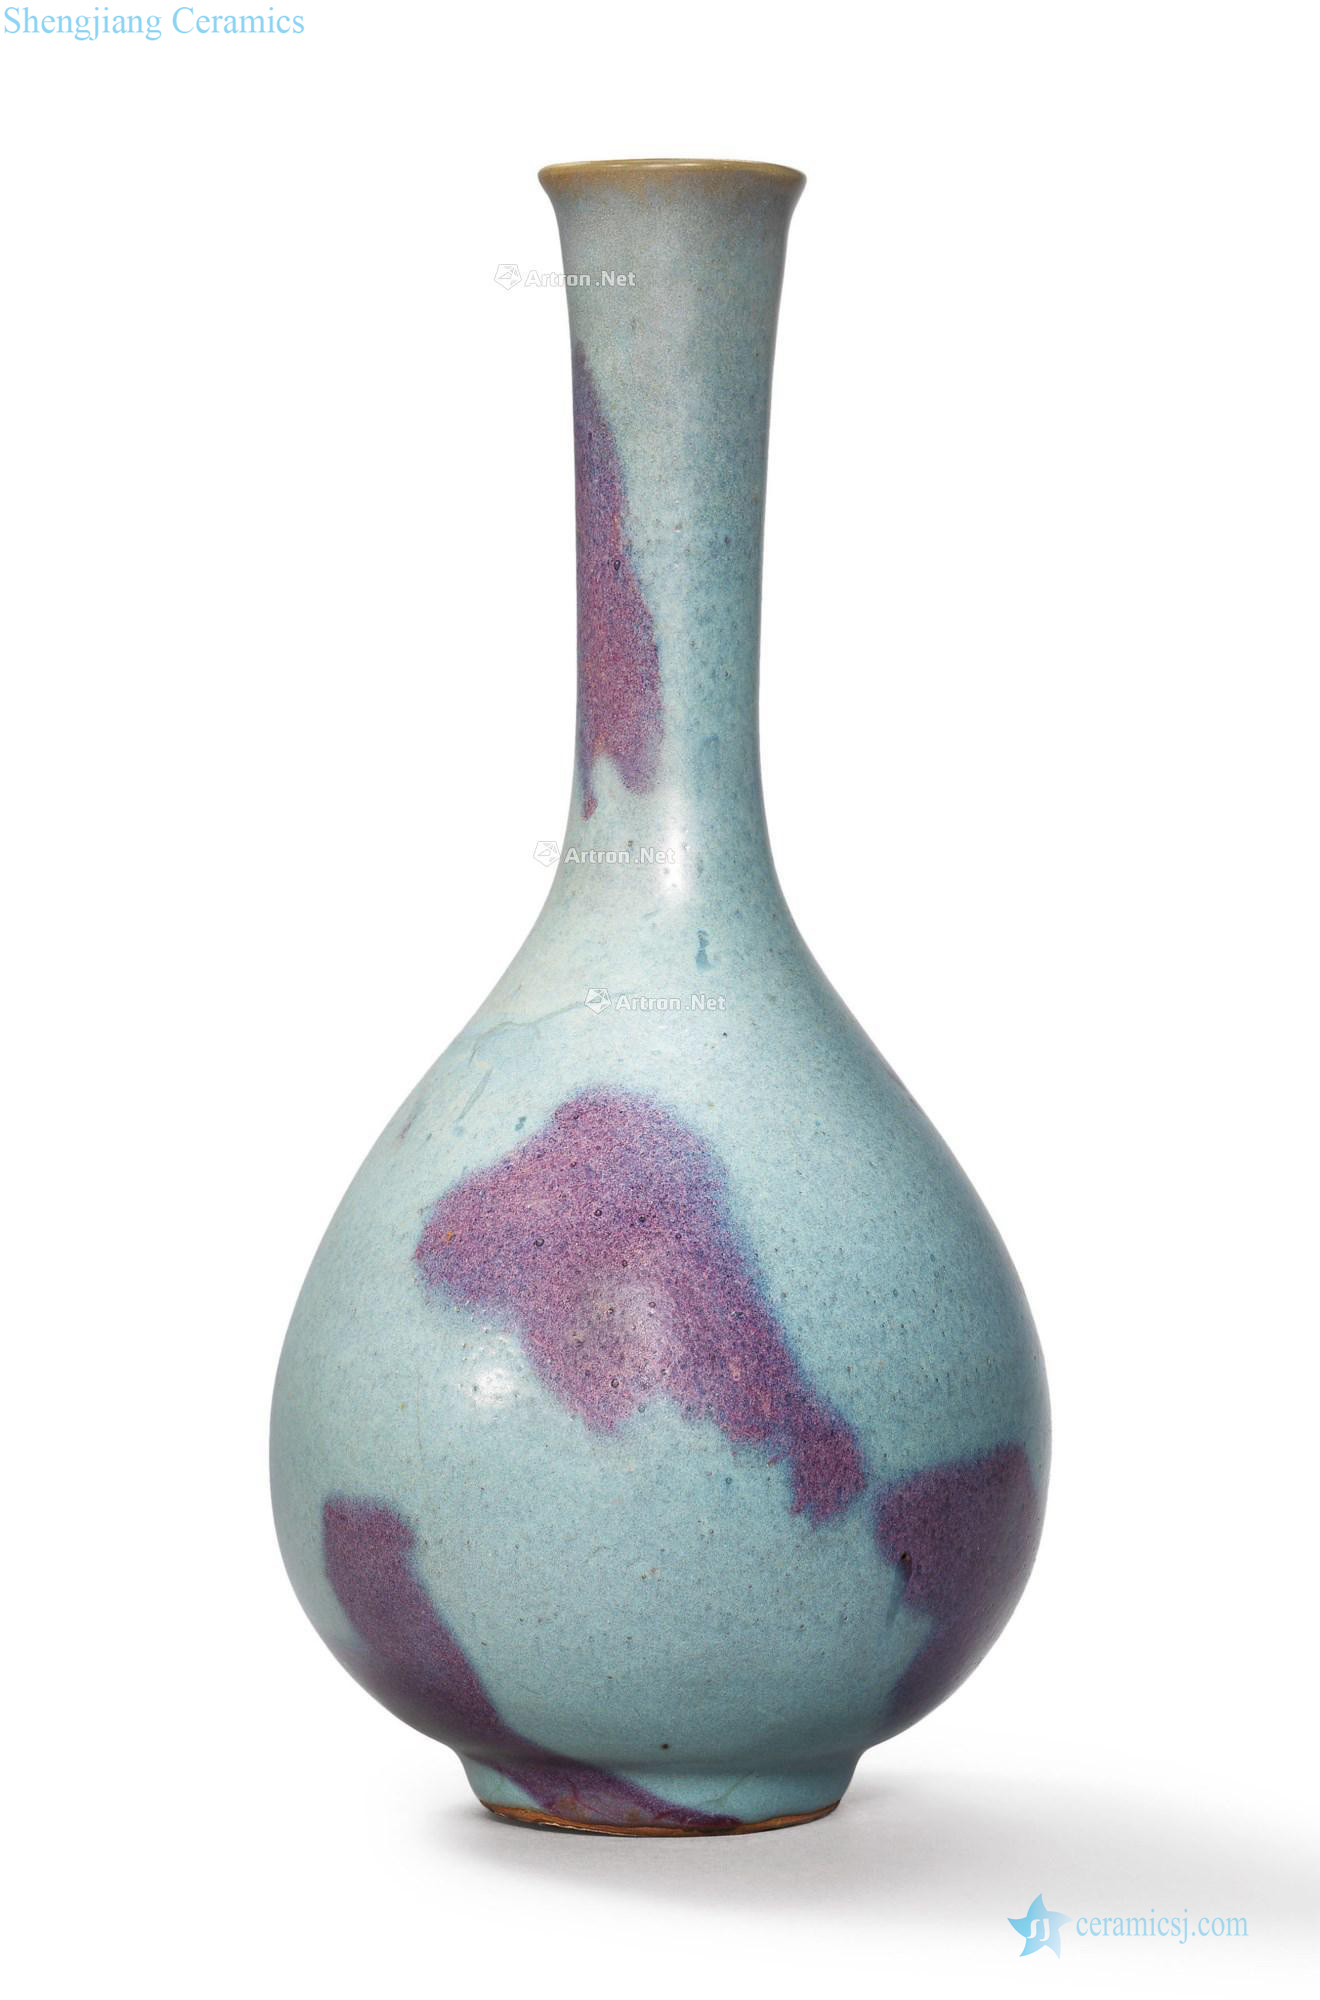 The late northern song dynasty early/gold azure glaze masterpieces erythema okho spring bottle